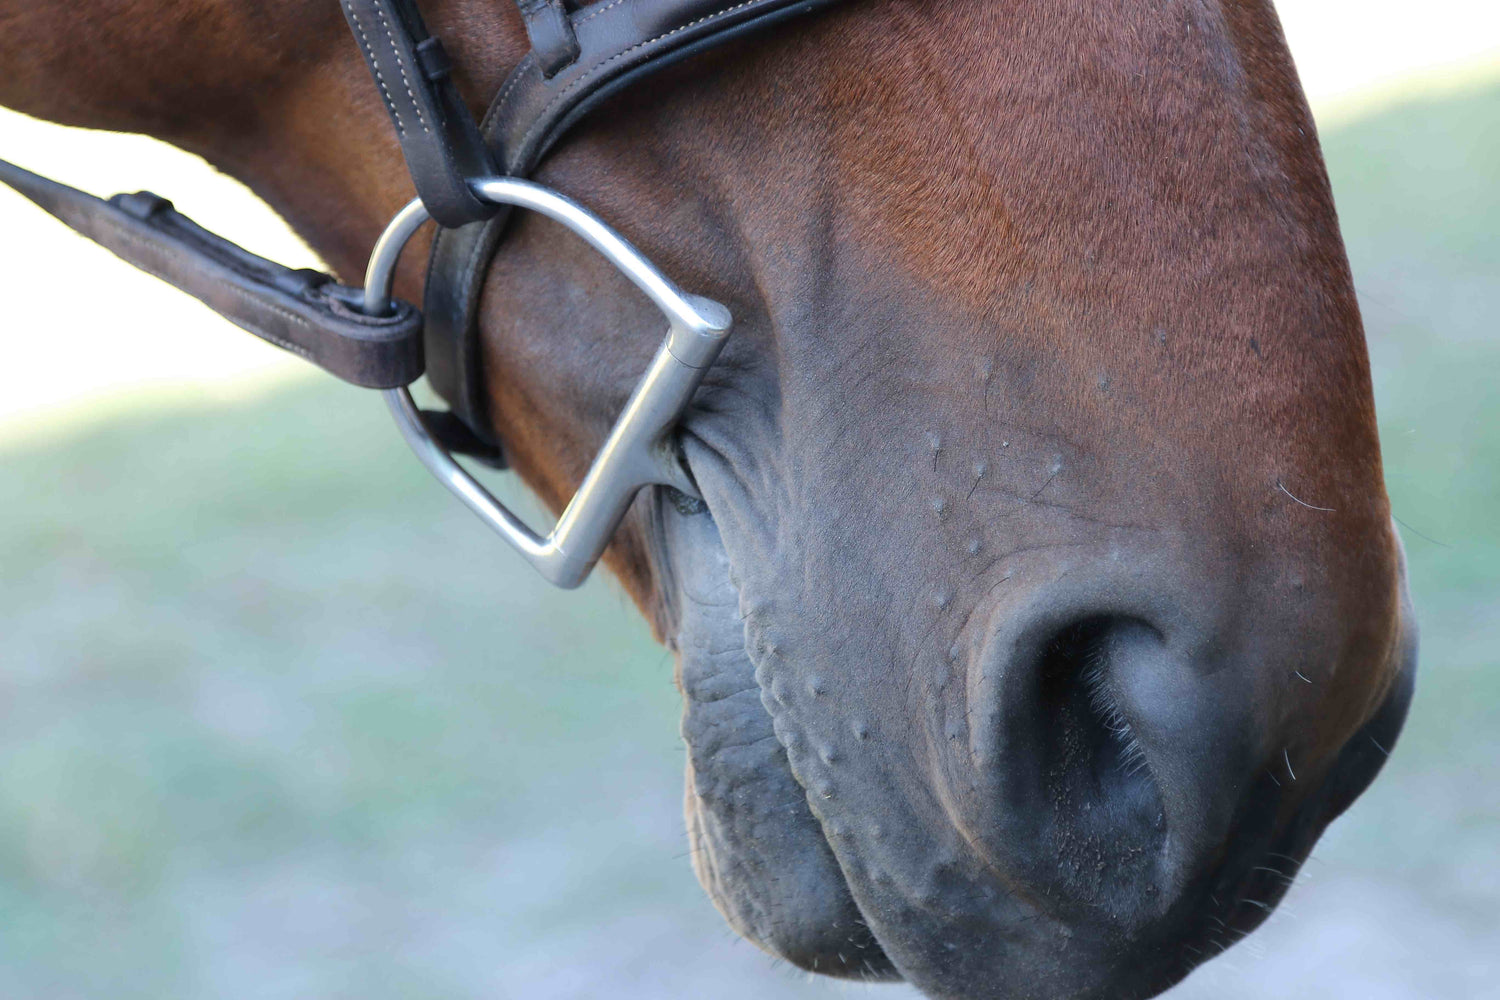 There is nothing so soft as a horse's muzzle.  This picture is a close up of an equine muzzle wearing a bridle with a dee ring bit.